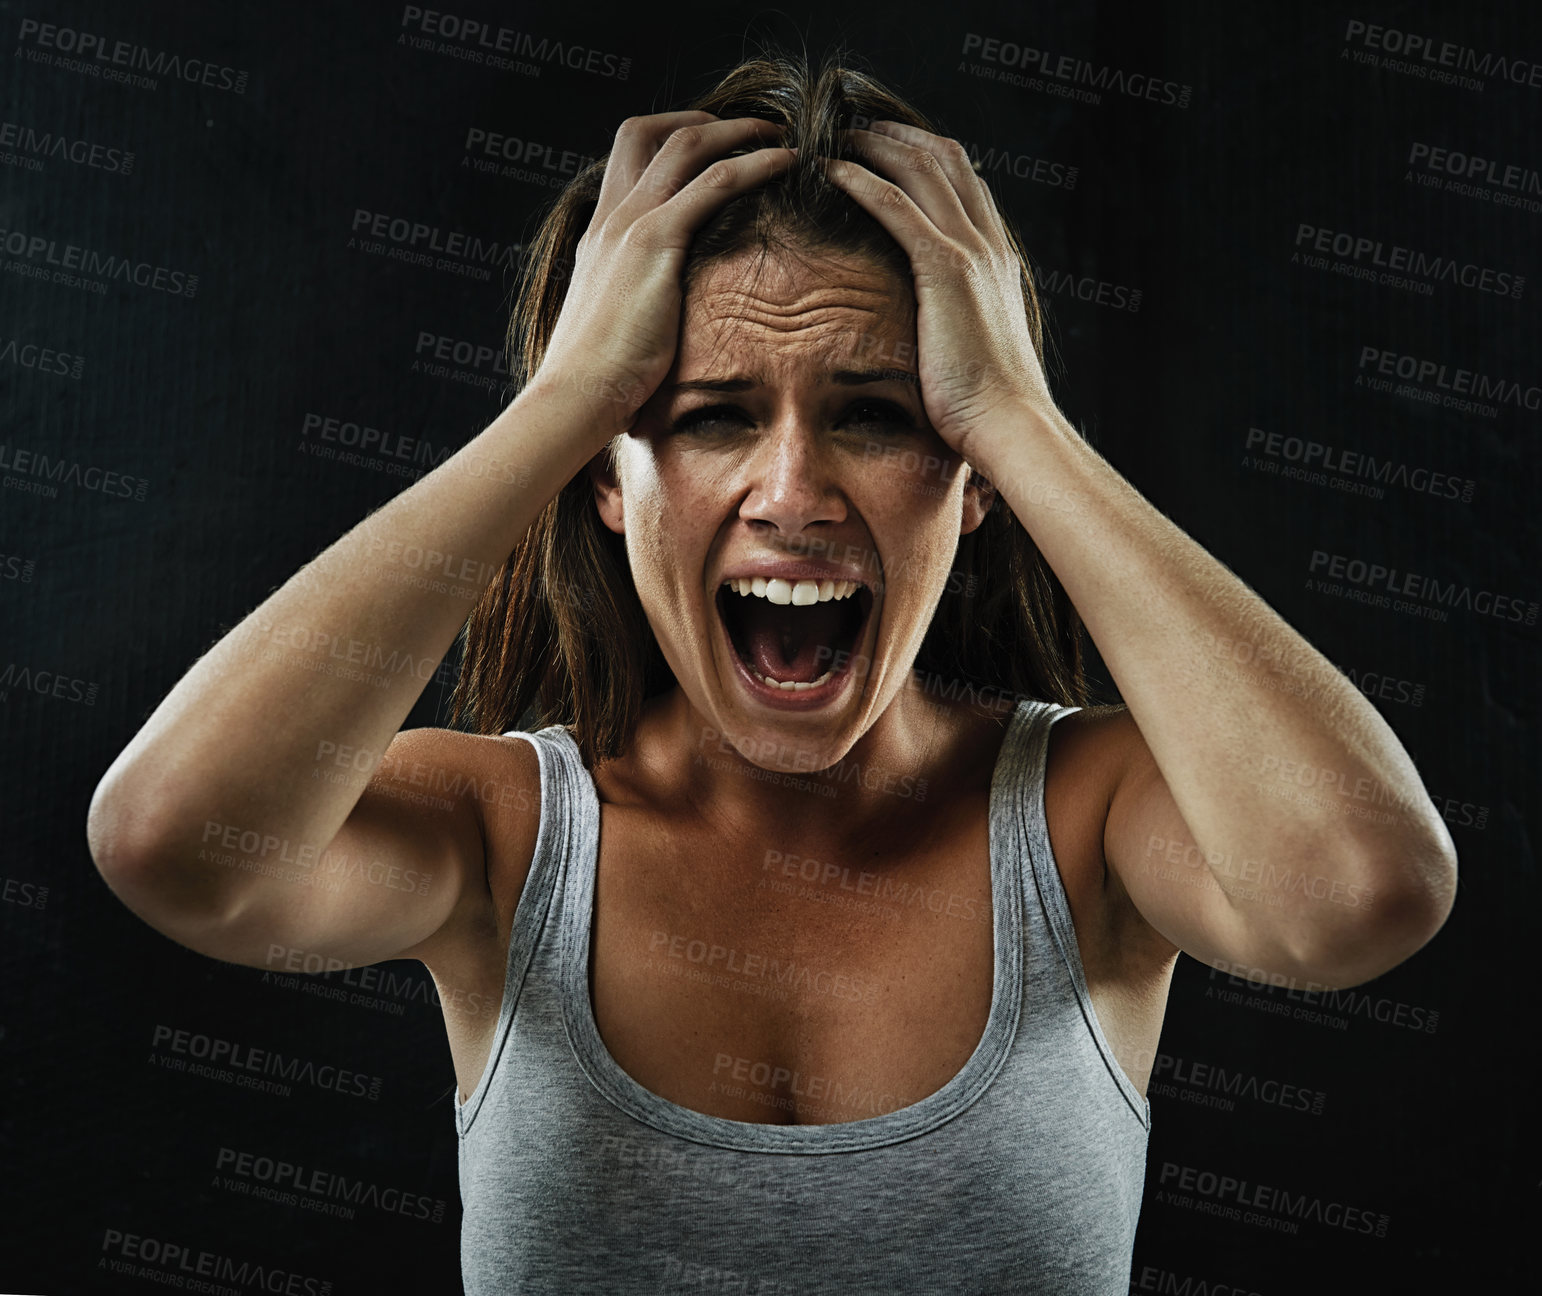 Buy stock photo A young woman screaming uncontrollably while isolated on a black background